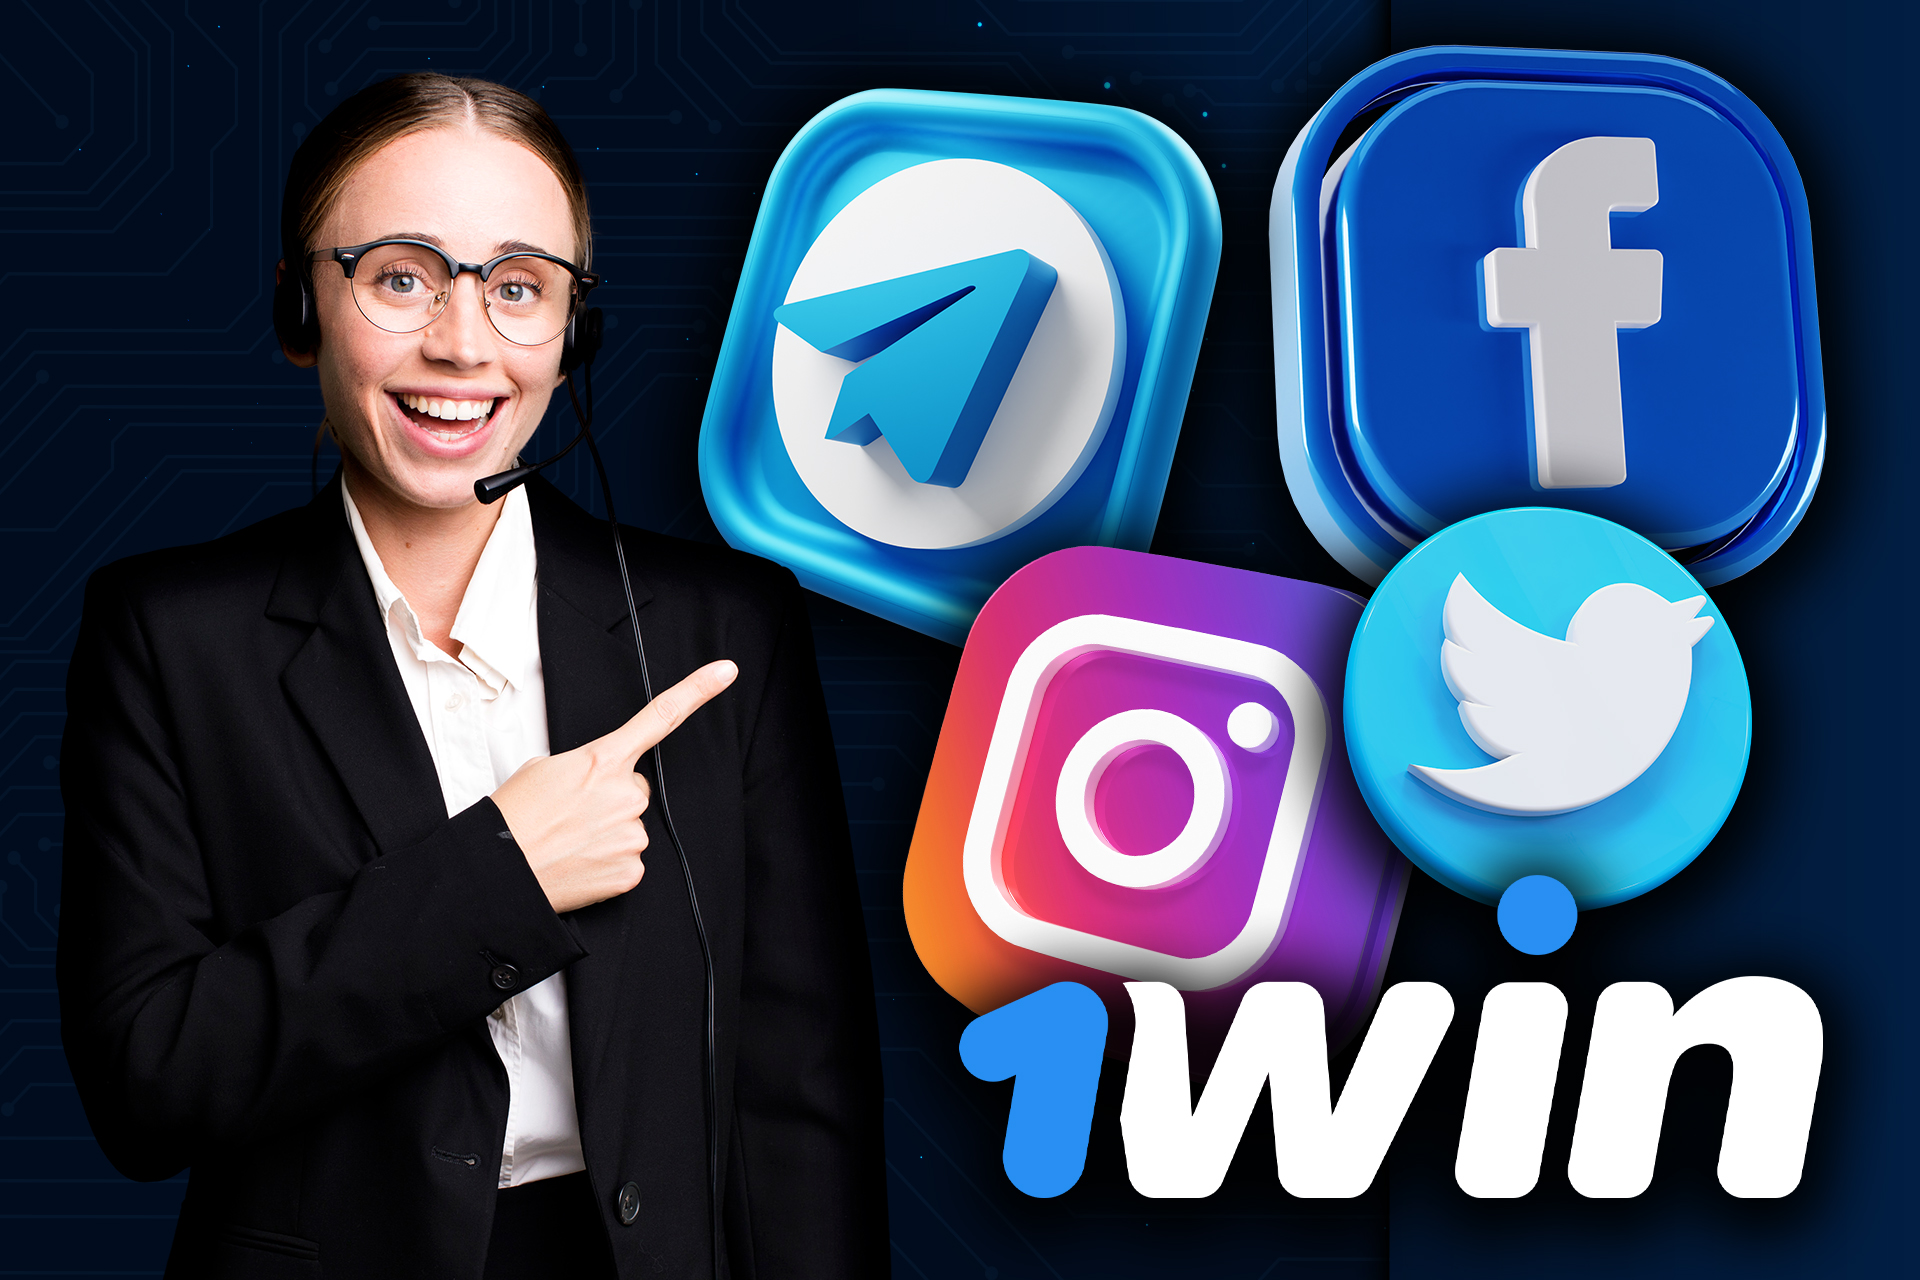 You can find the 1win channels on various social media.